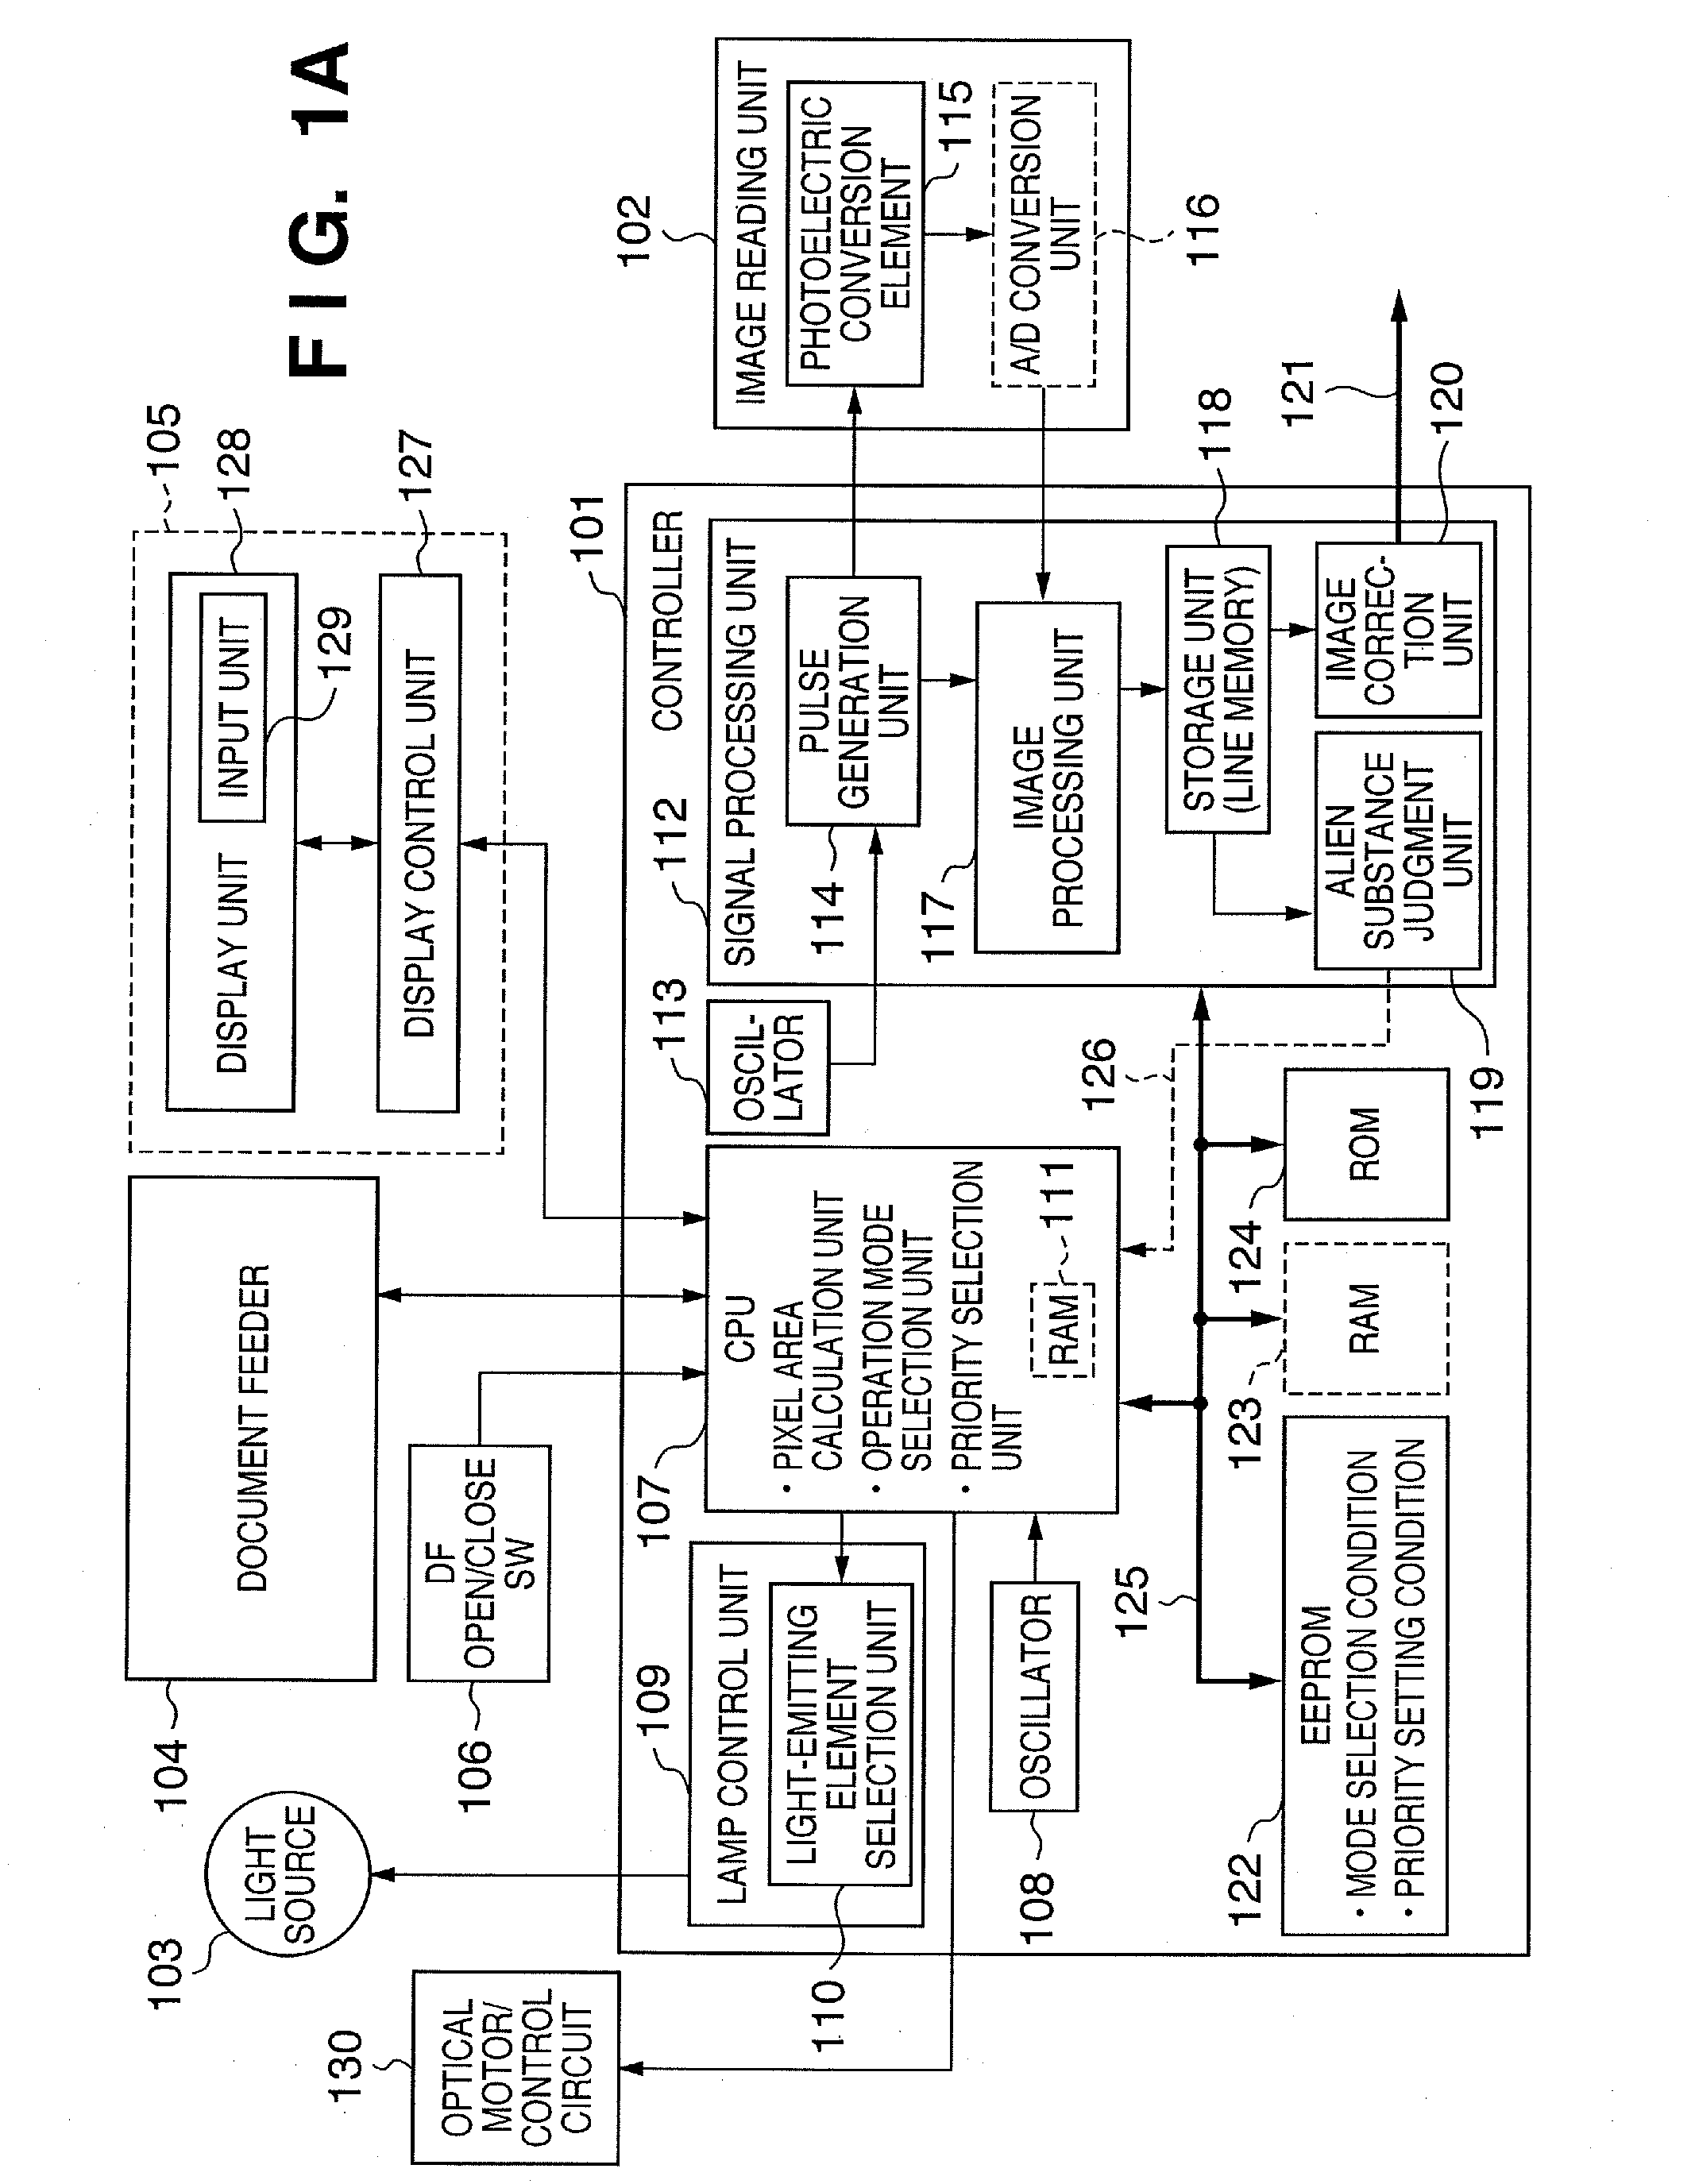 Image reading apparatus and method of displaying alien substance location thereof